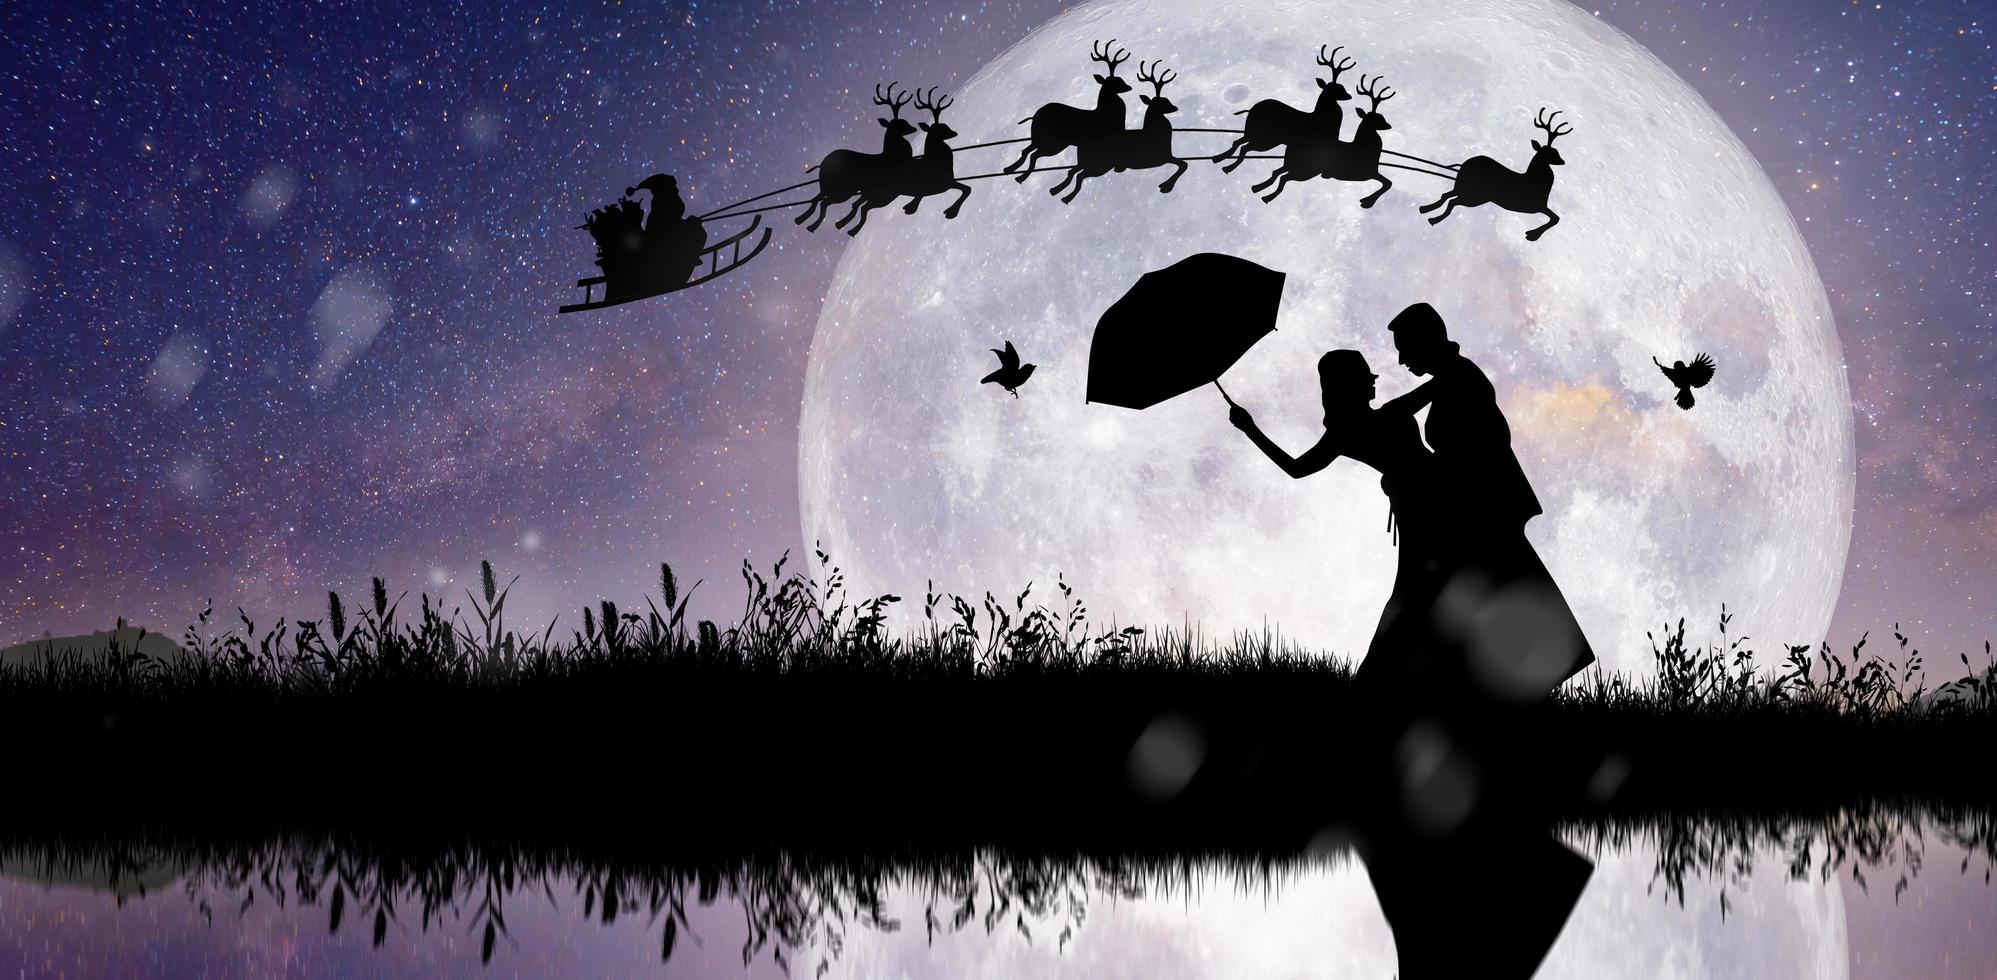 Silhouette of Santa Claus at night Christmas with couple dancing under the full moon. photo